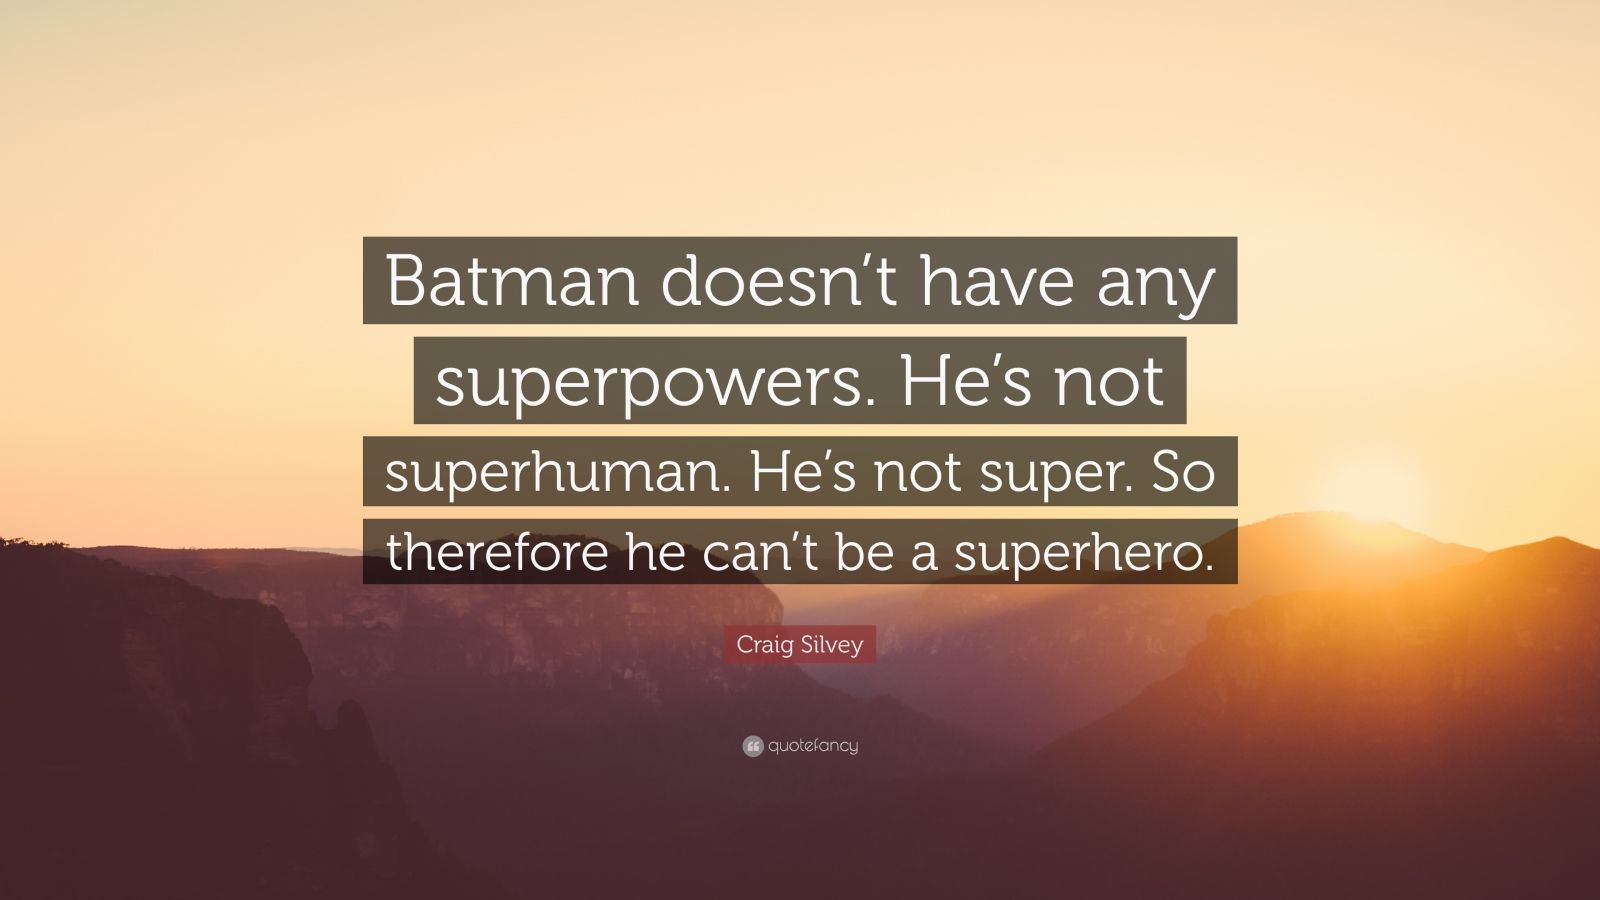 Craig Silvey Quote “Batman doesn’t have any superpowers. He’s not